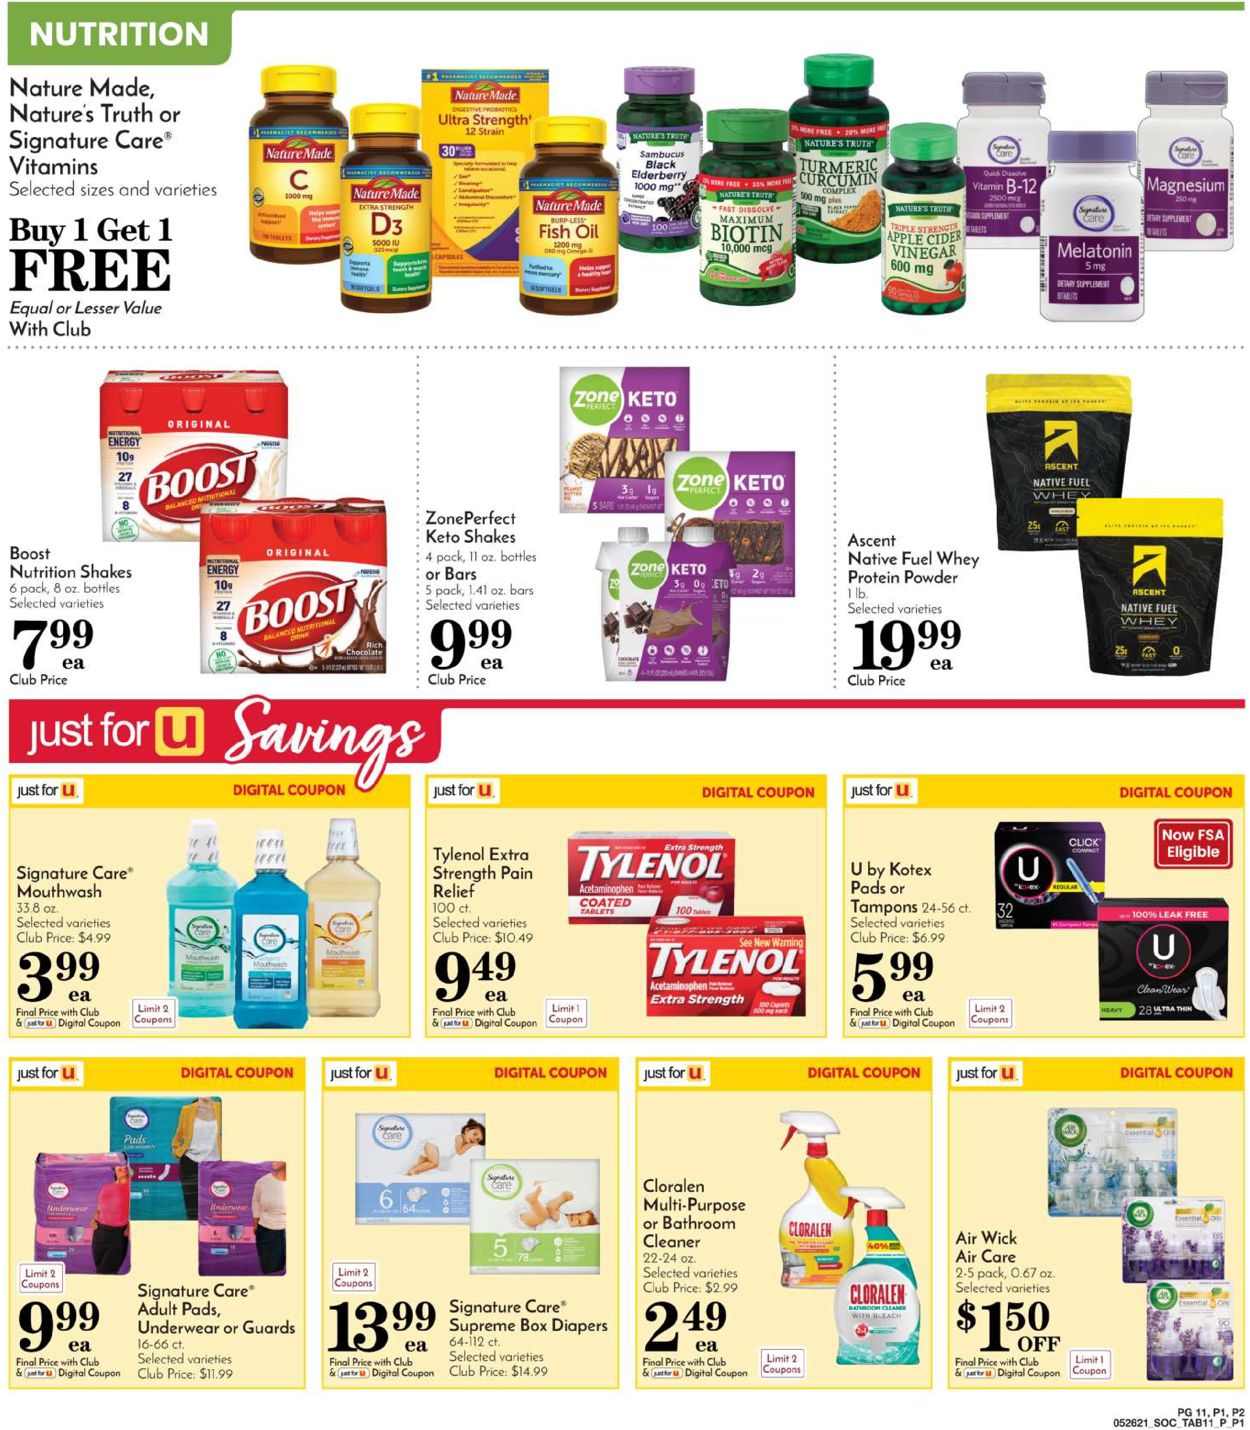 Pavilions Ad from 05/26/2021